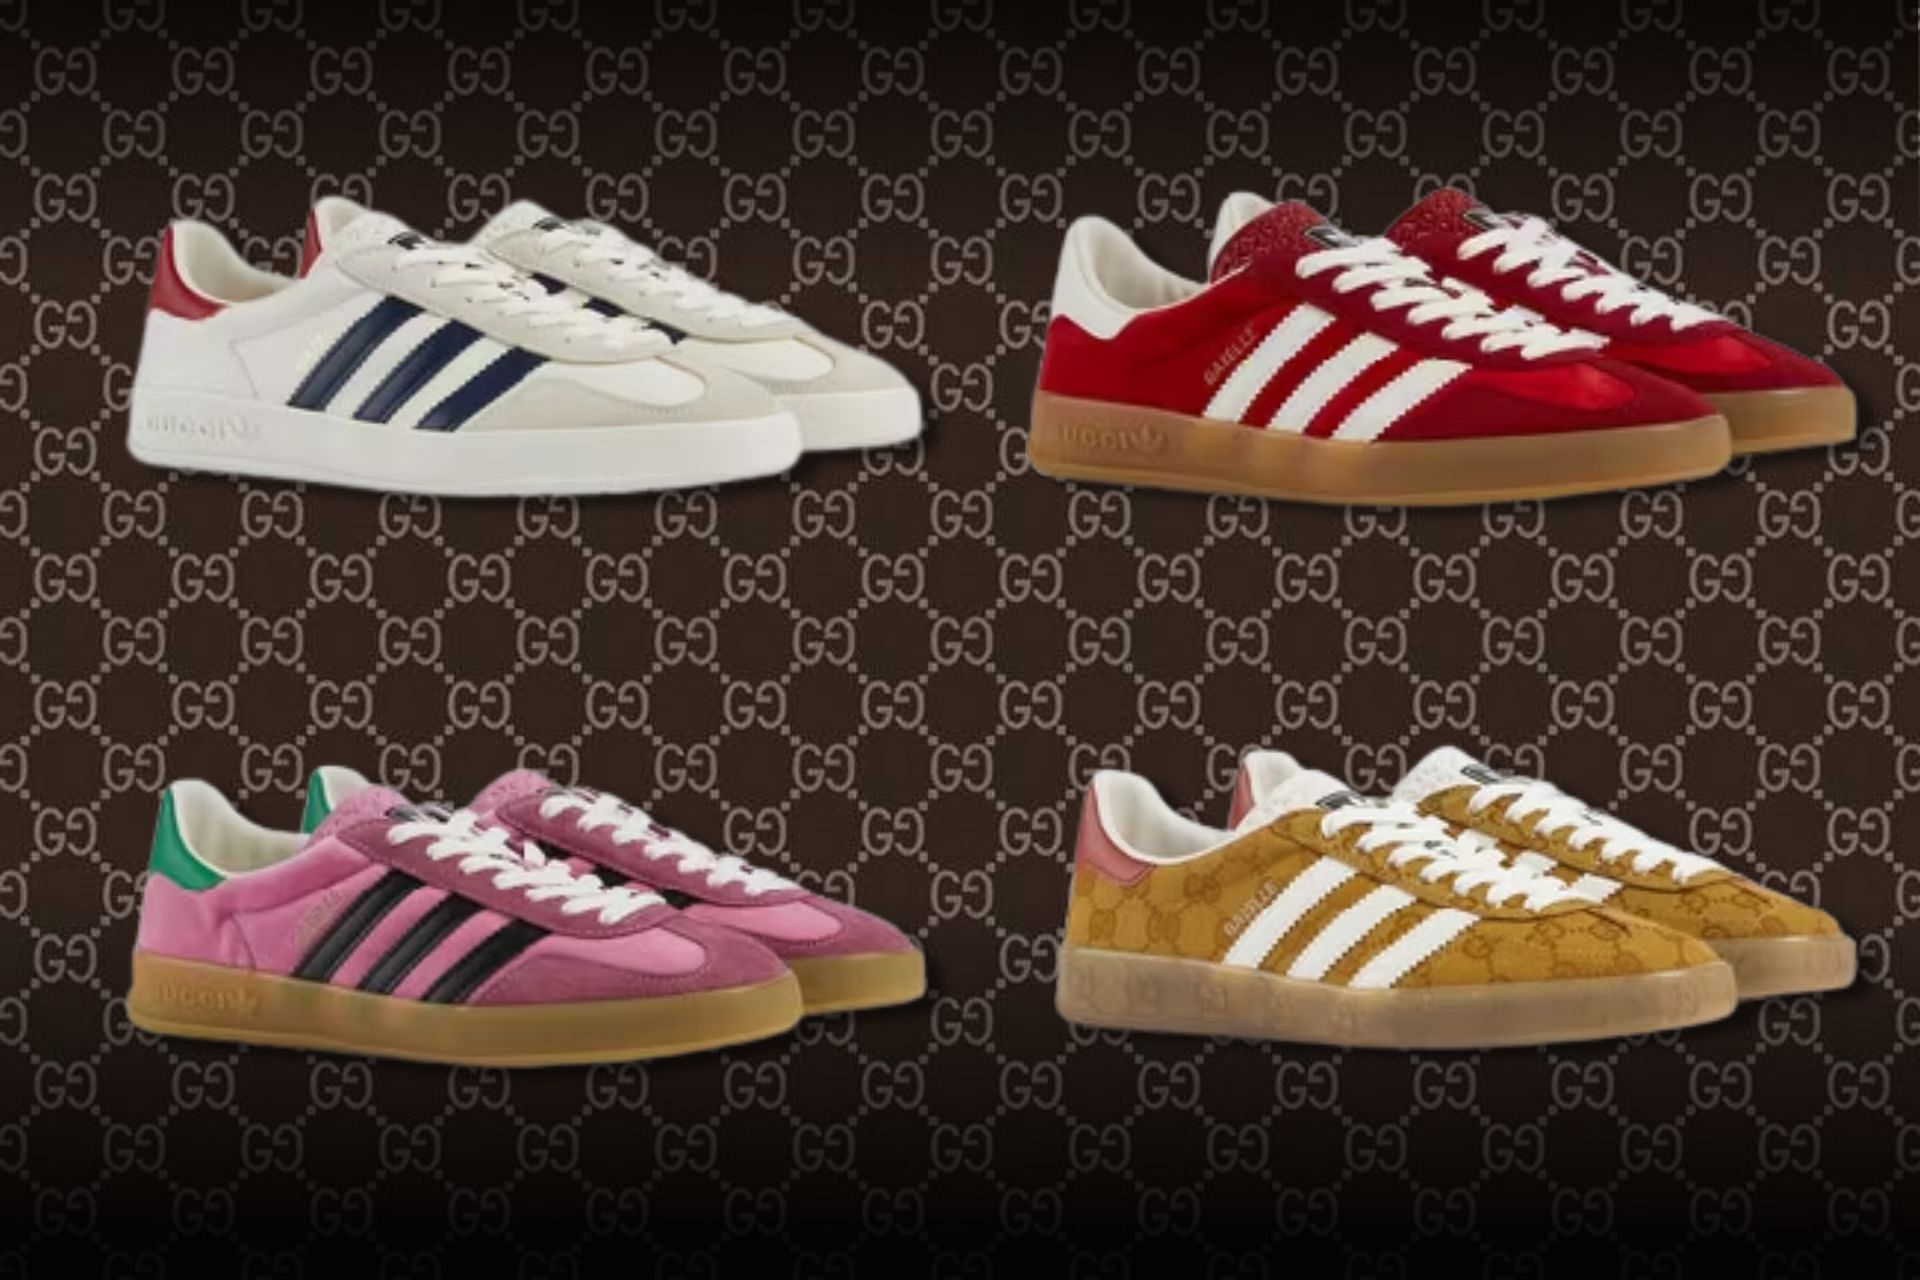 adidas x Gucci Gazelle Collection Releasing Again